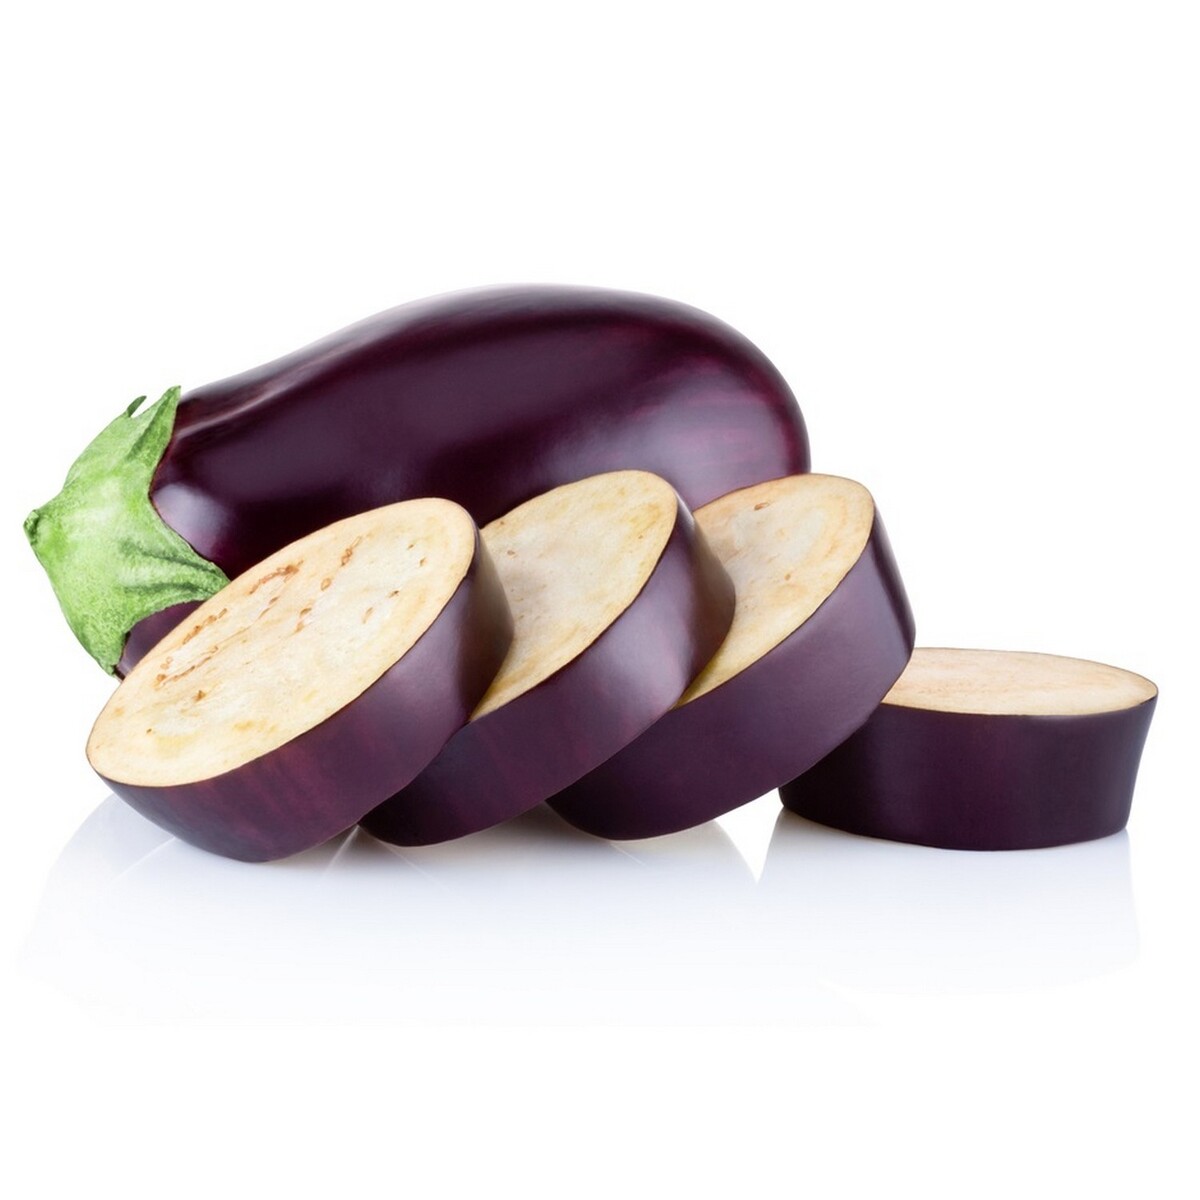 Brinjal Big Approx. 450gm to 500gm